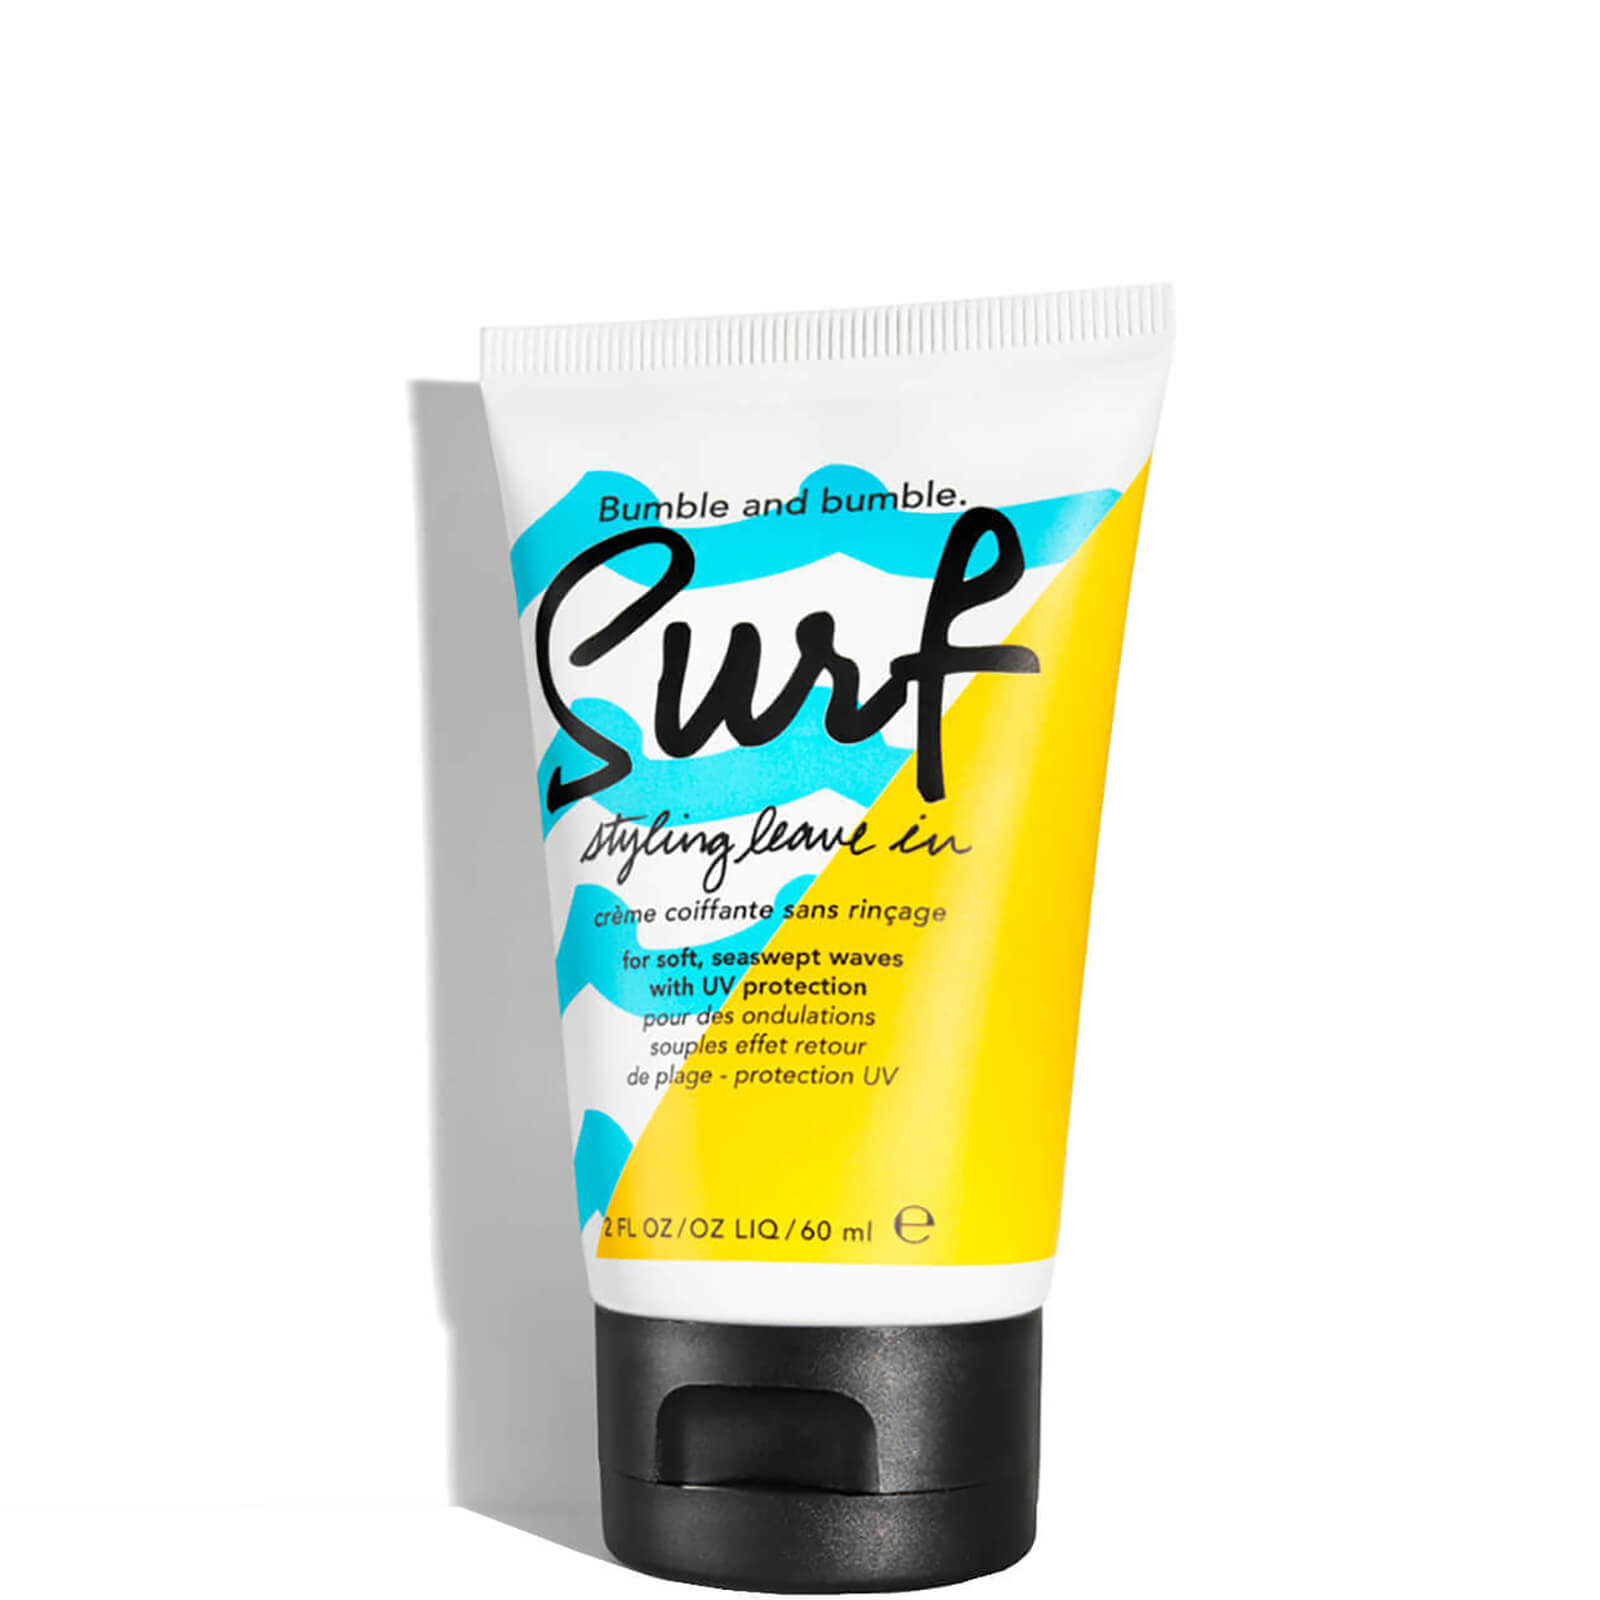 Bumble and bumble Surf Leave in Styling Cream 60ml lookfantastic.com imagine